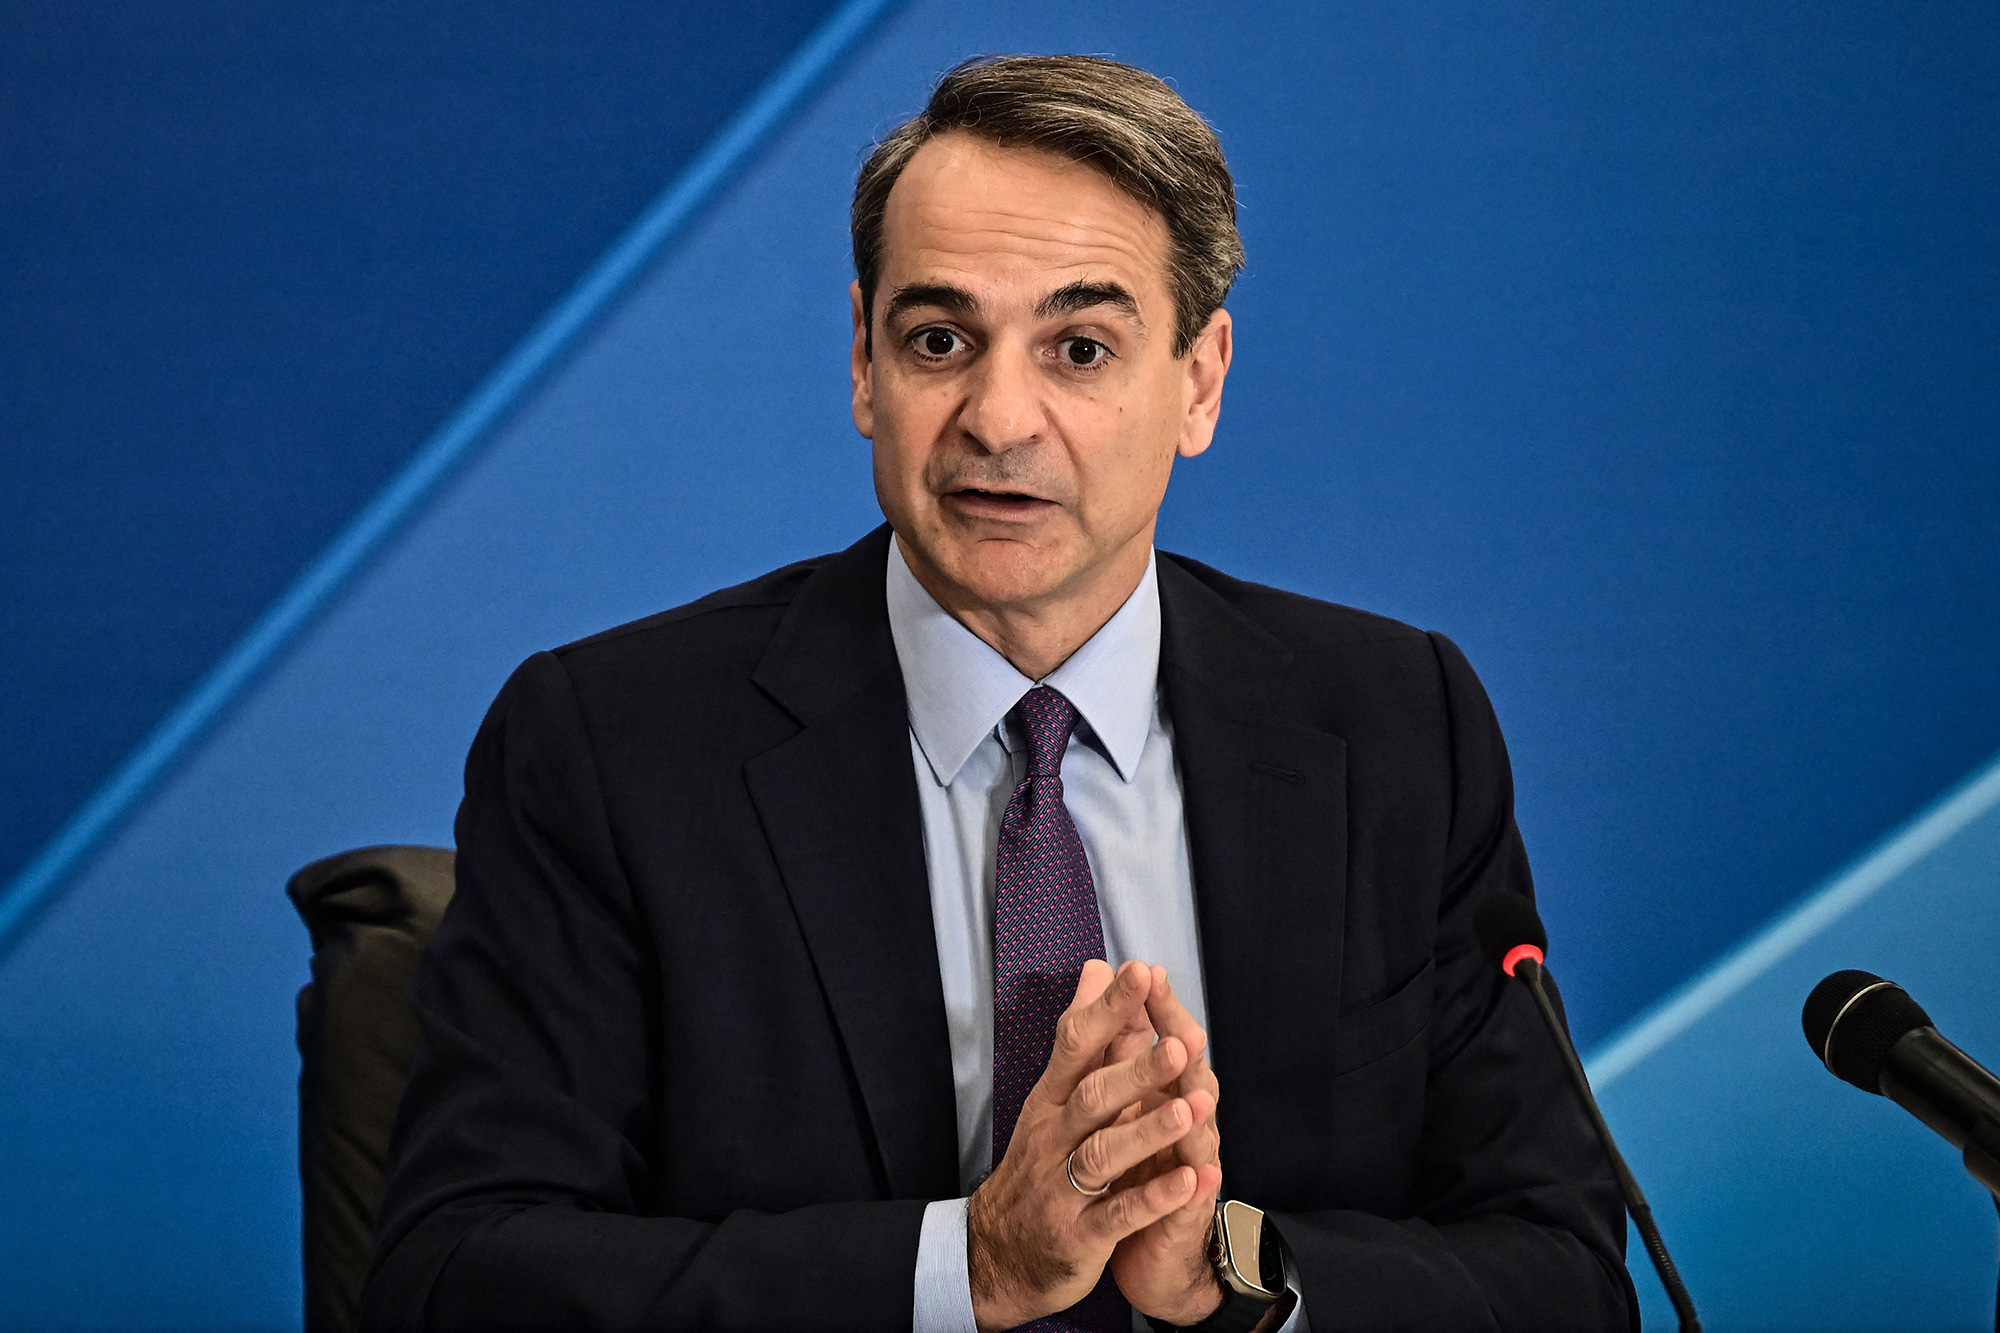 Greek Prime Minister Kyriakos Mitsotakis speaks during a press conference in Athens, Greece, on January 23.